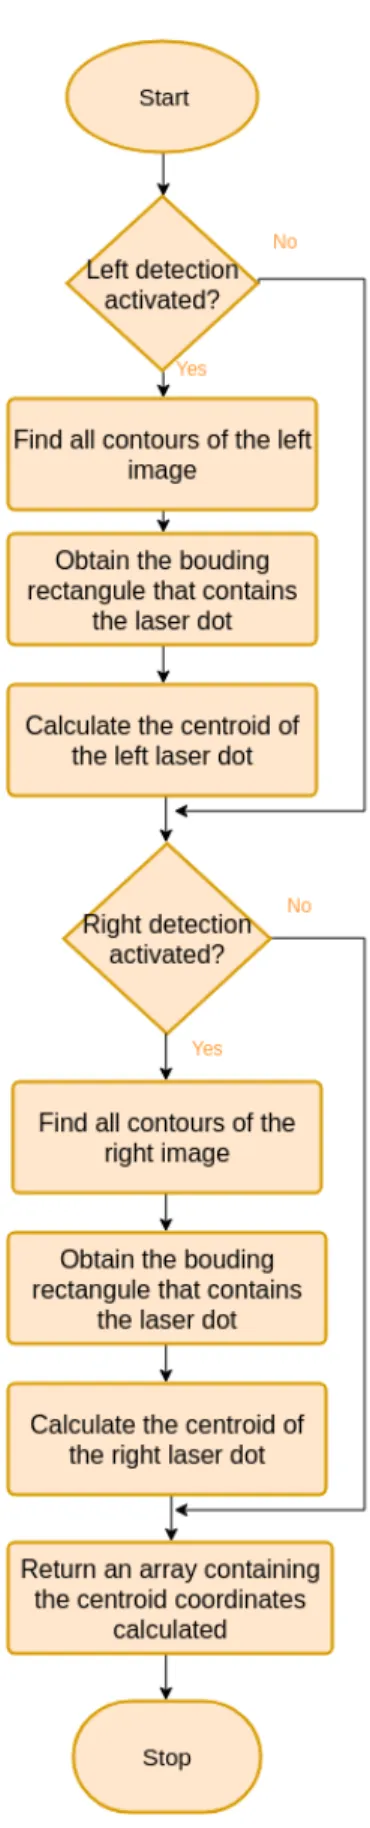 Figure 3.6: Flowchart of the operations that occur in the calcCentroidsDots method .